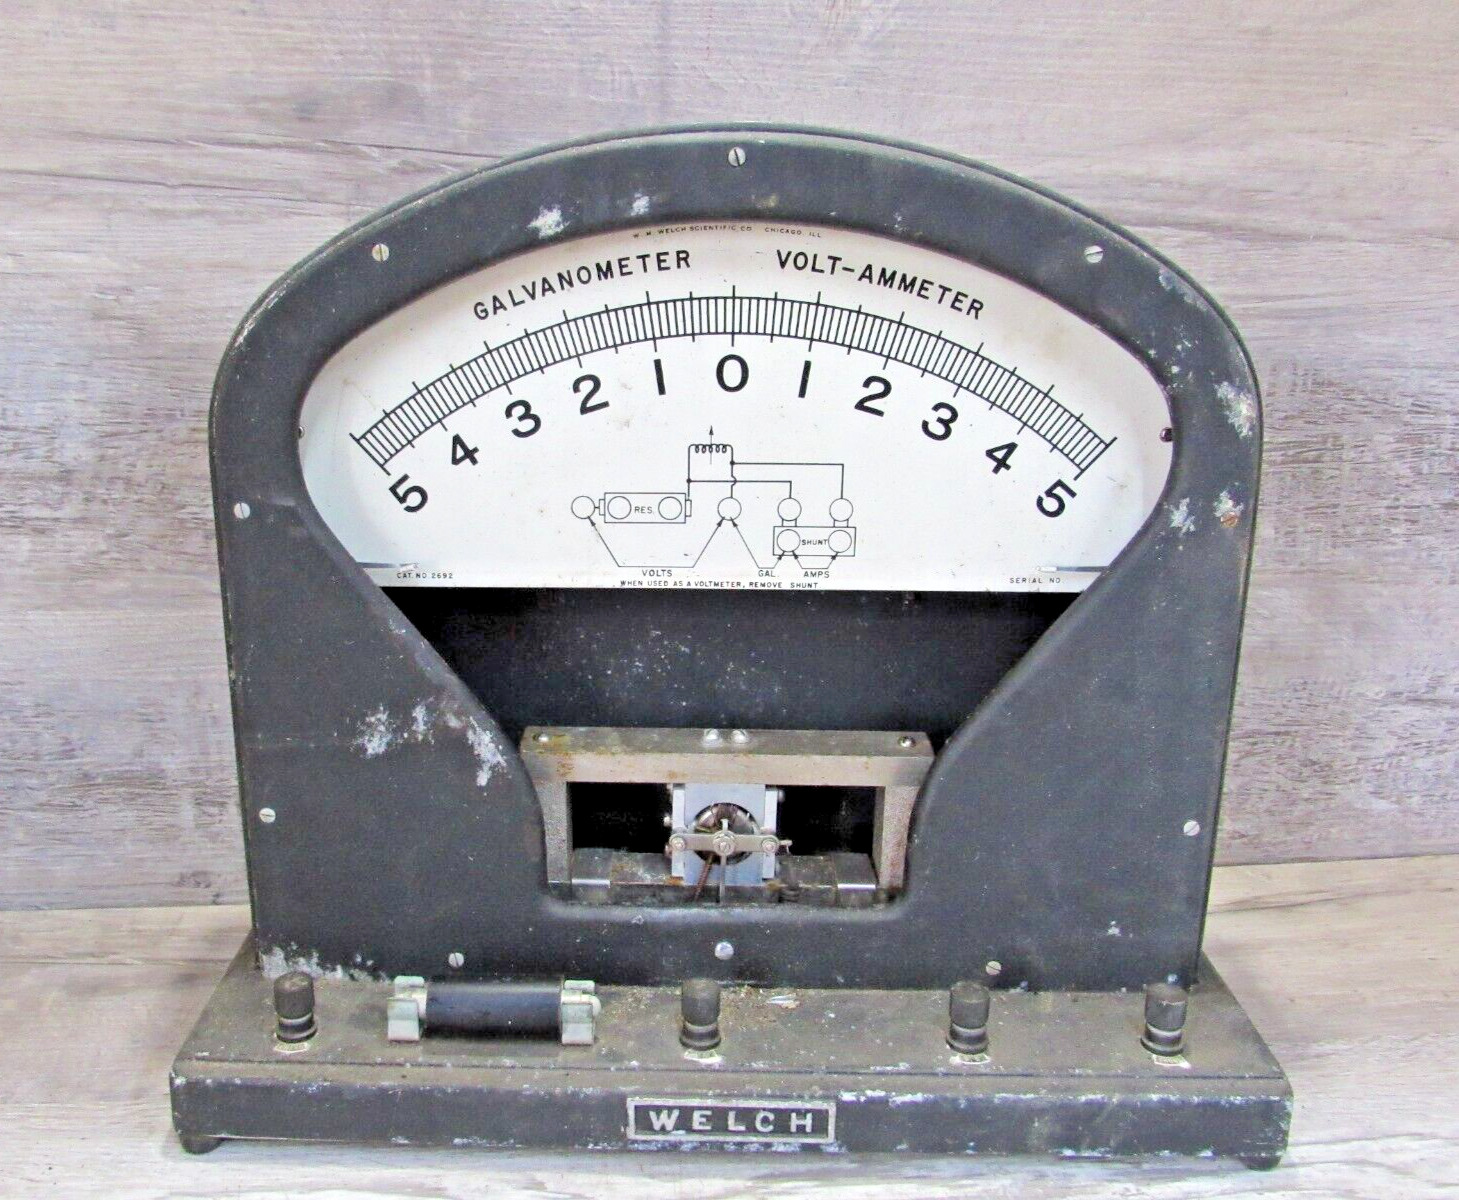 Untested VINTAGE Large WELCH GALVANOMETER VOLT-AMMETER  AS IS Steampunk